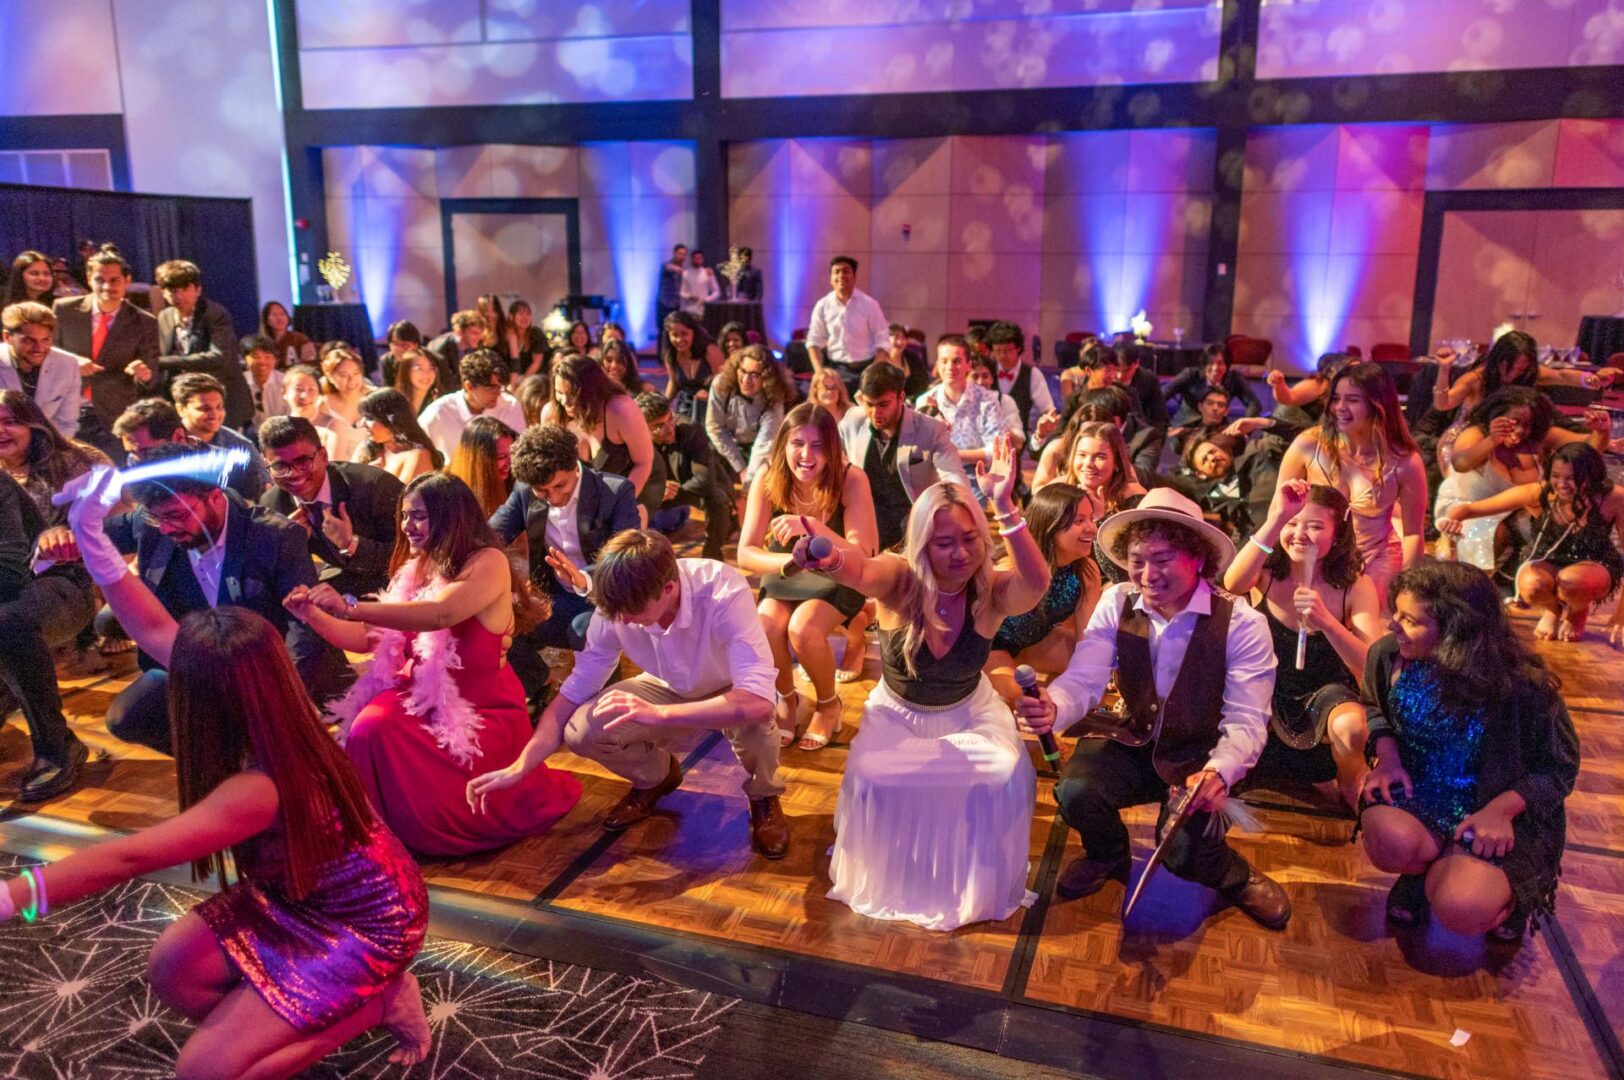 Dozens of students drop low the ground during the International Prom held at Chico State.